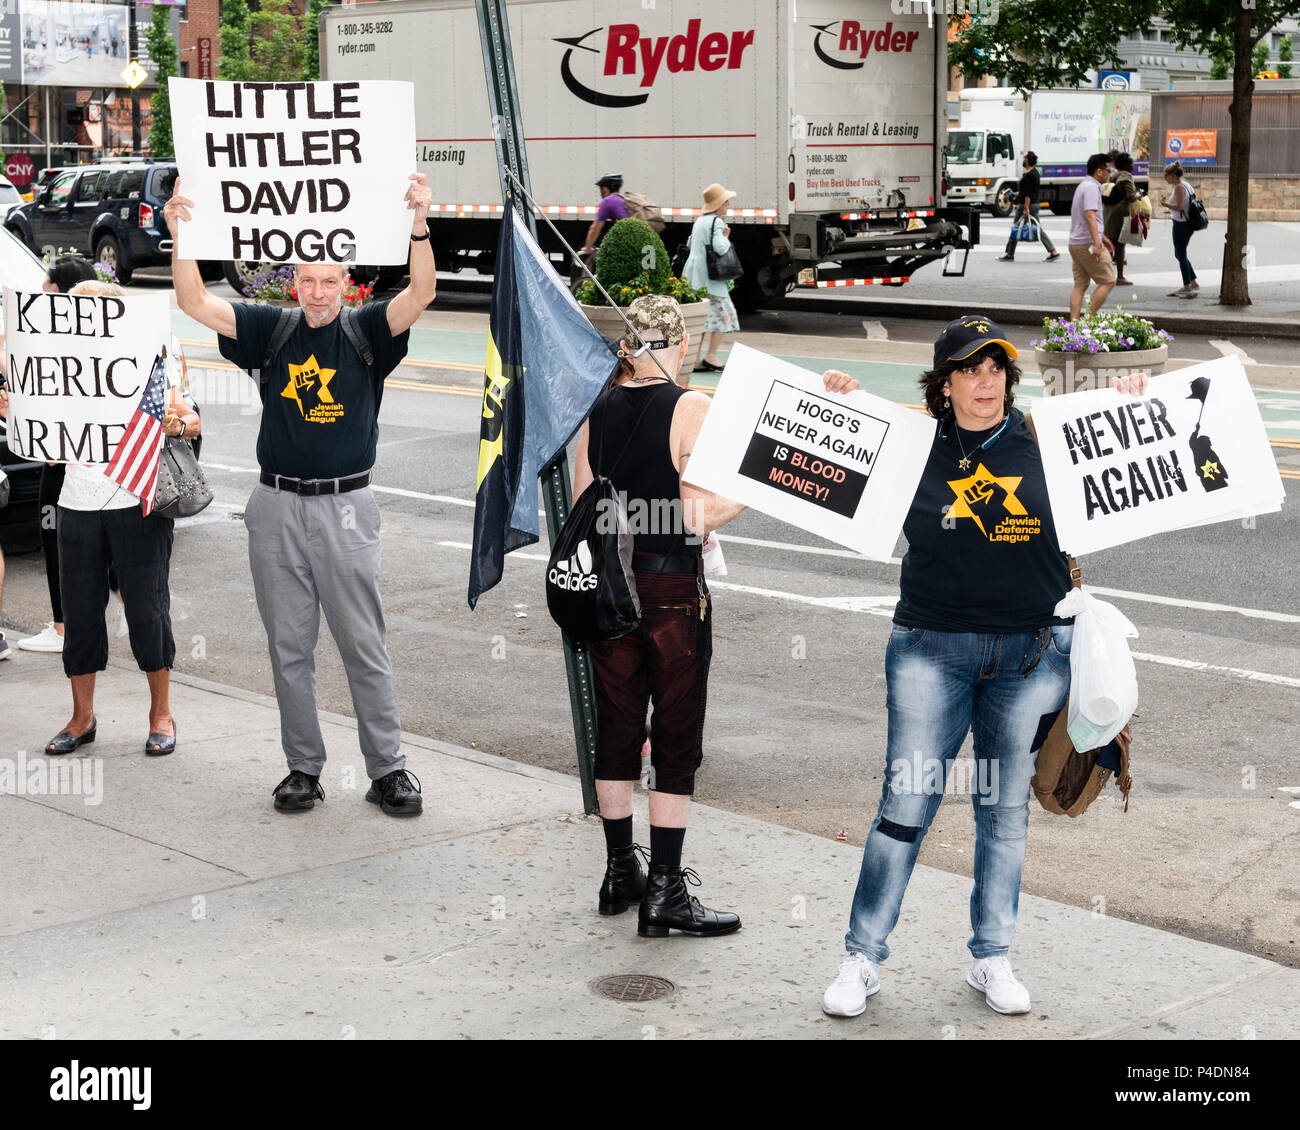 Protesters outside the Barnes & Noble book store where David Hogg, recent graduate of  Marjory Stoneman Douglas High School in Parkland, Florida and Lauren Hogg, co-author with David of #NeverAgain: A New Generation Draws the Line, are doing a book signing at the Barnes & Noble book store in Union Square. Stock Photo